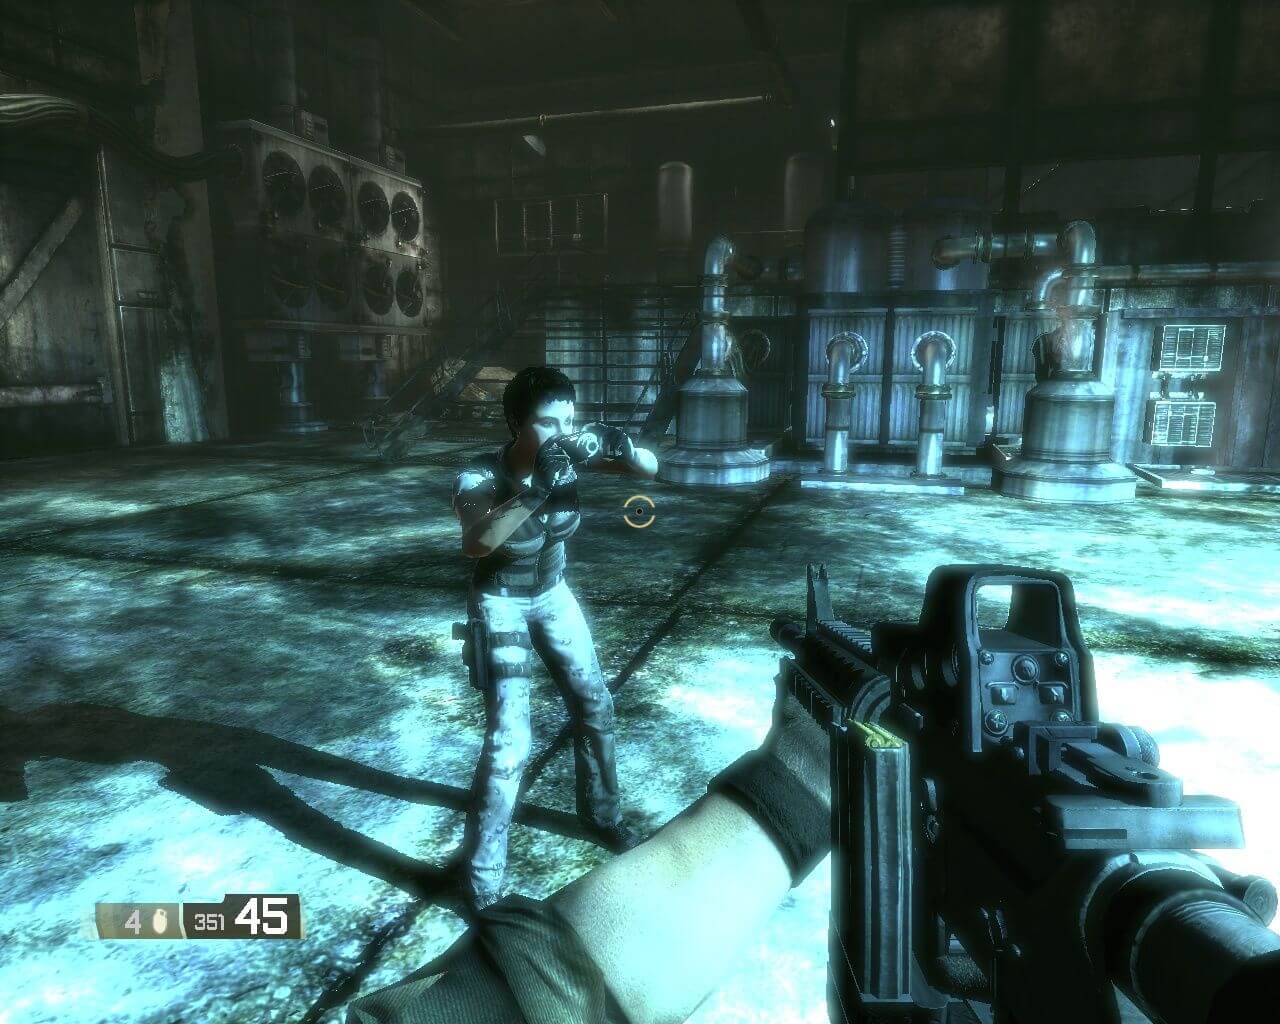 The classic pc freeware title AREA 51 (2005) works on the deck